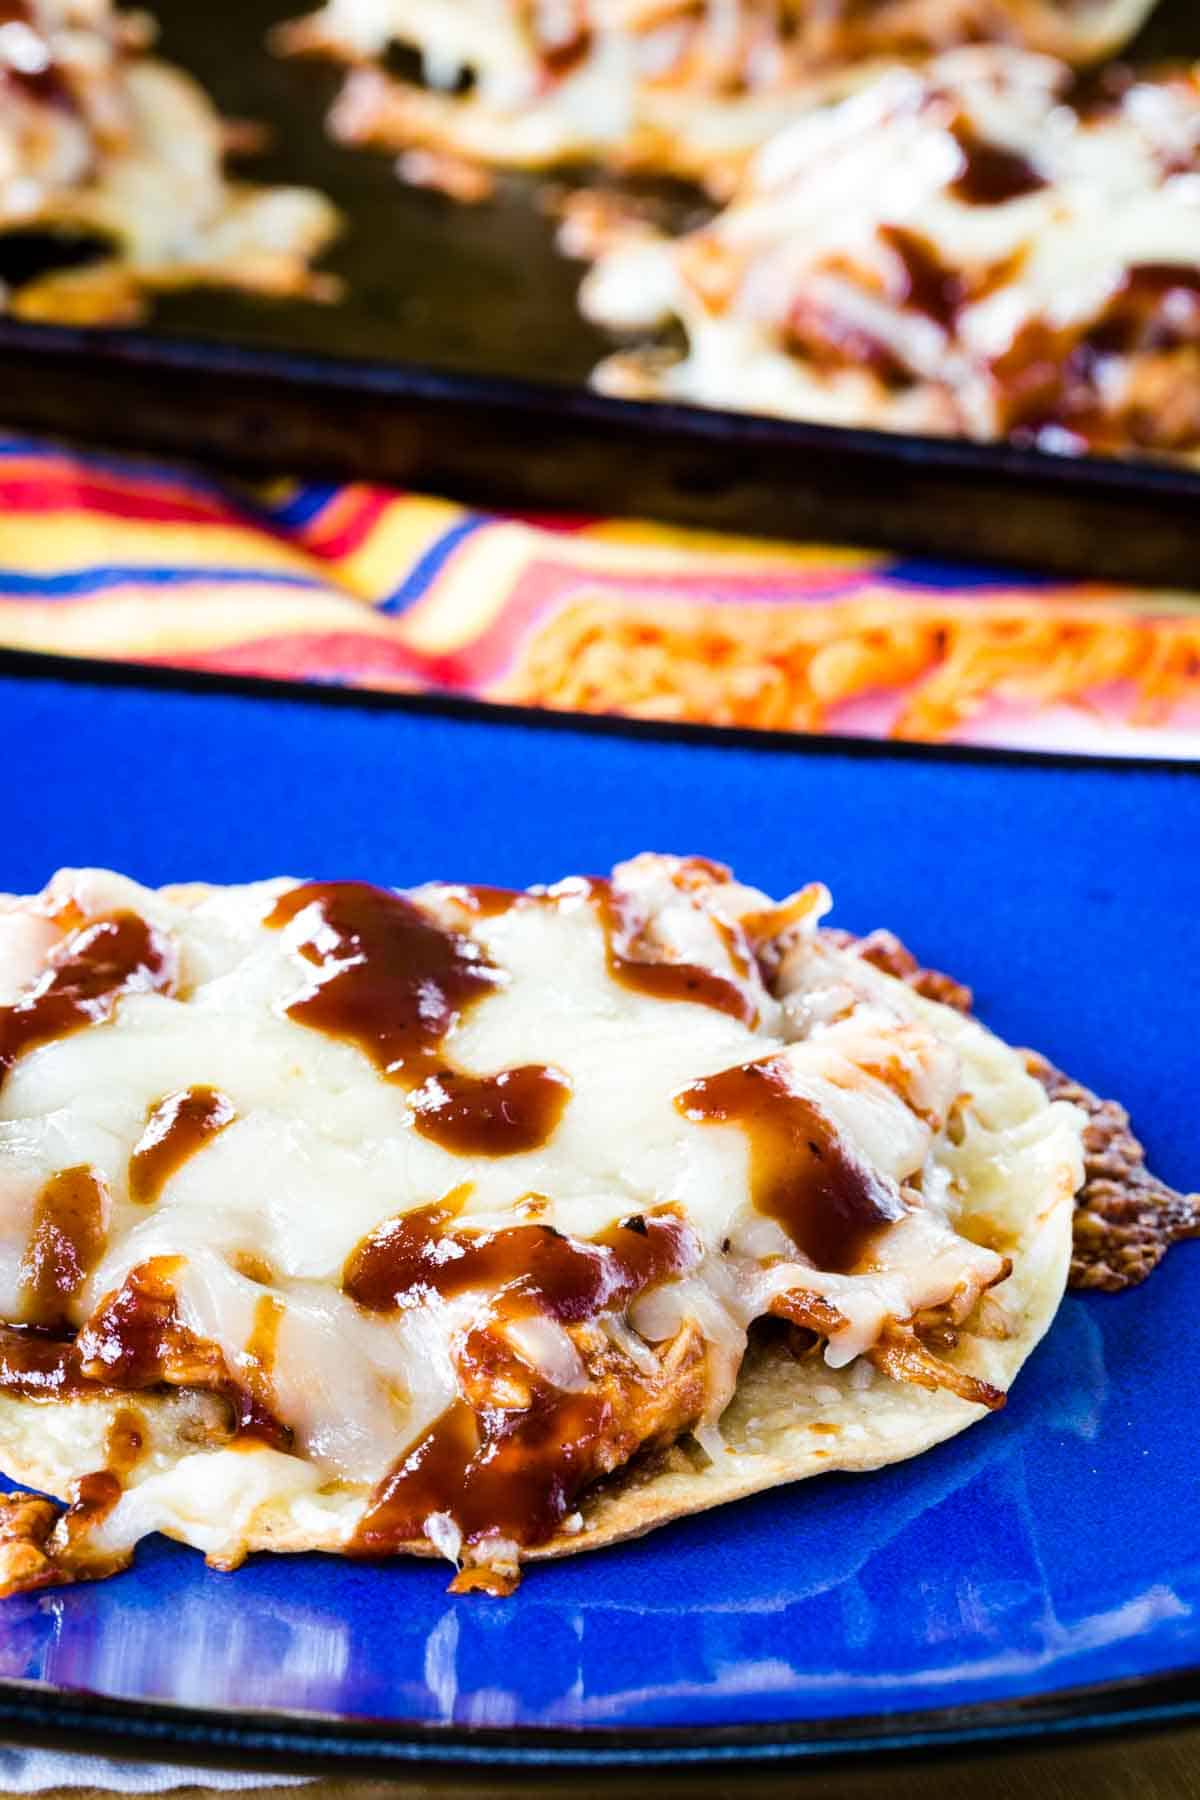 A chicken tostada with barbecue sauce and cheese on a blue plate.